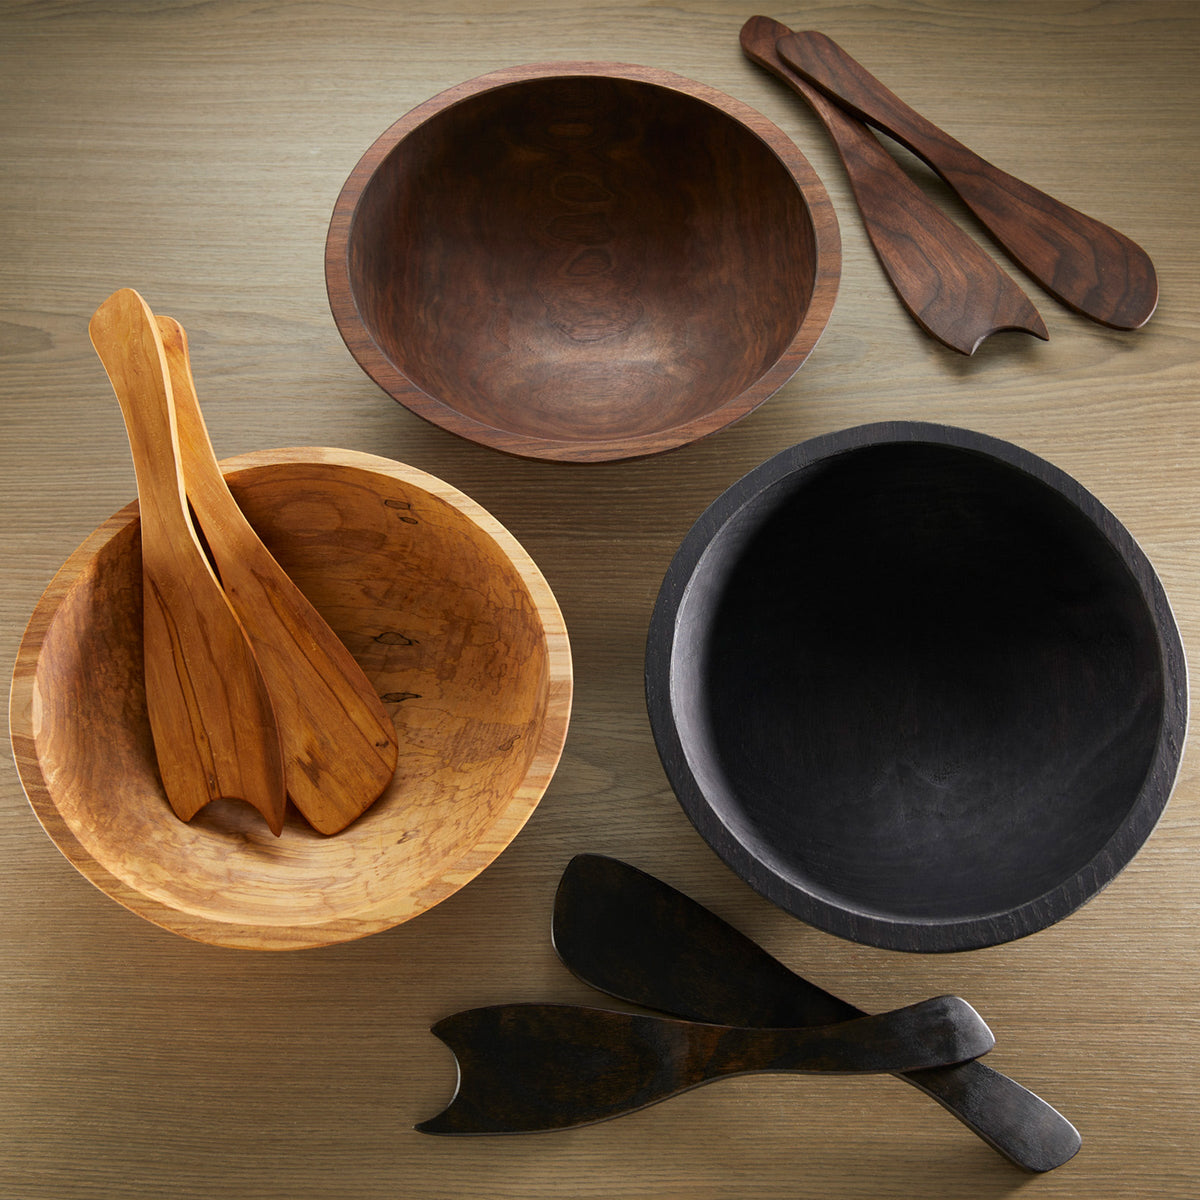 Four Peterman&#39;s handmade wooden Black Walnut 13&quot; Handcrafted Serving Bowls and utensils, crafted from black walnut, on a table.